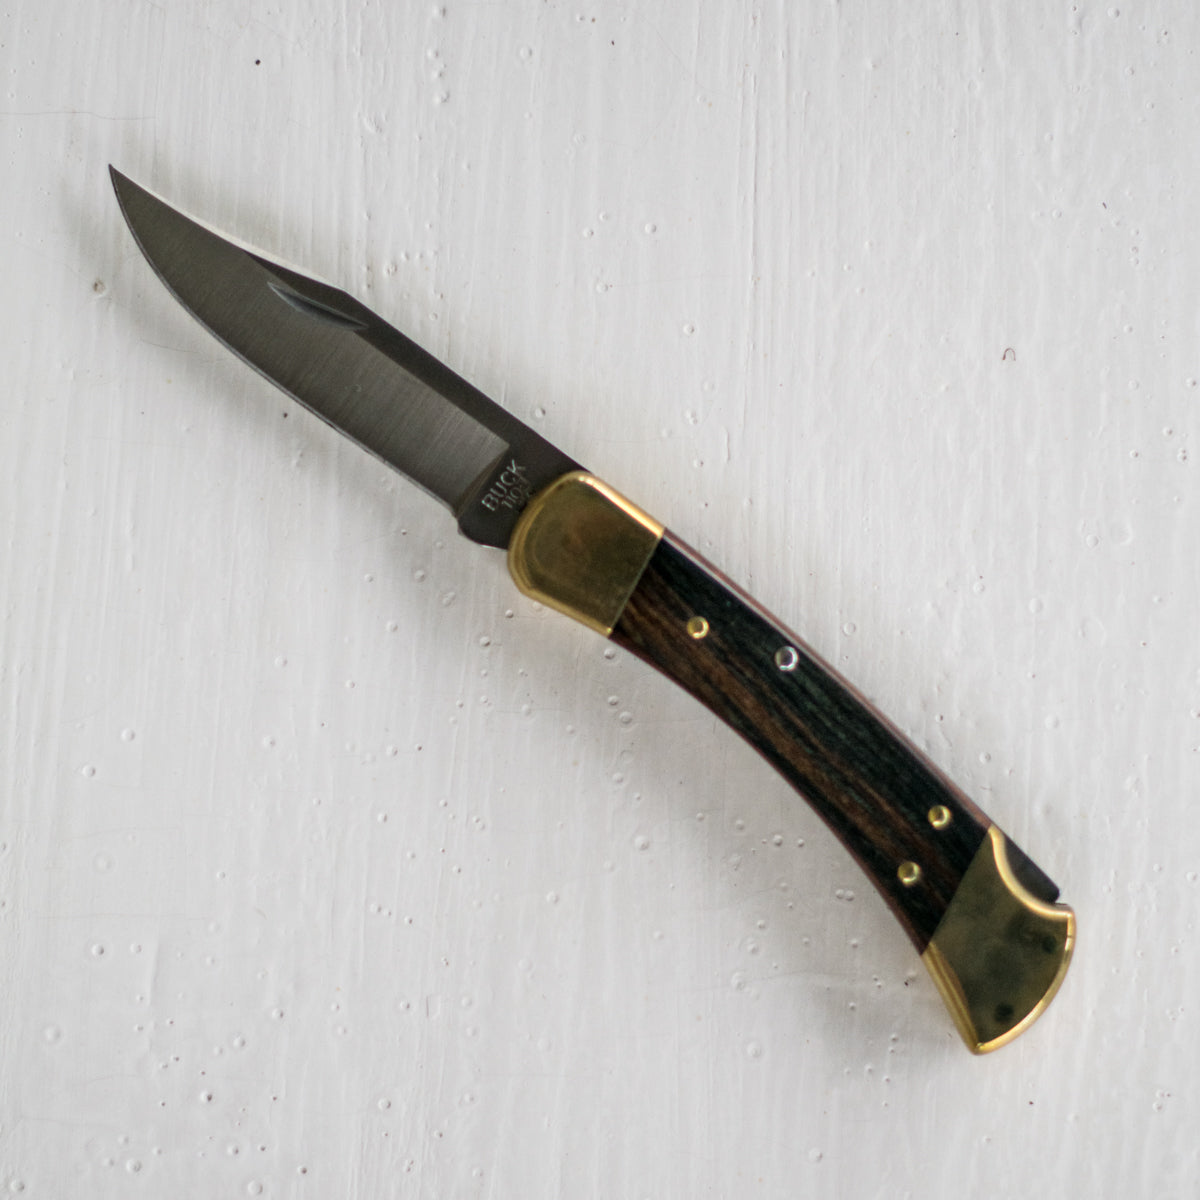 Buck Knives 110 Folding Hunter - Odgers and McClelland Exchange Stores